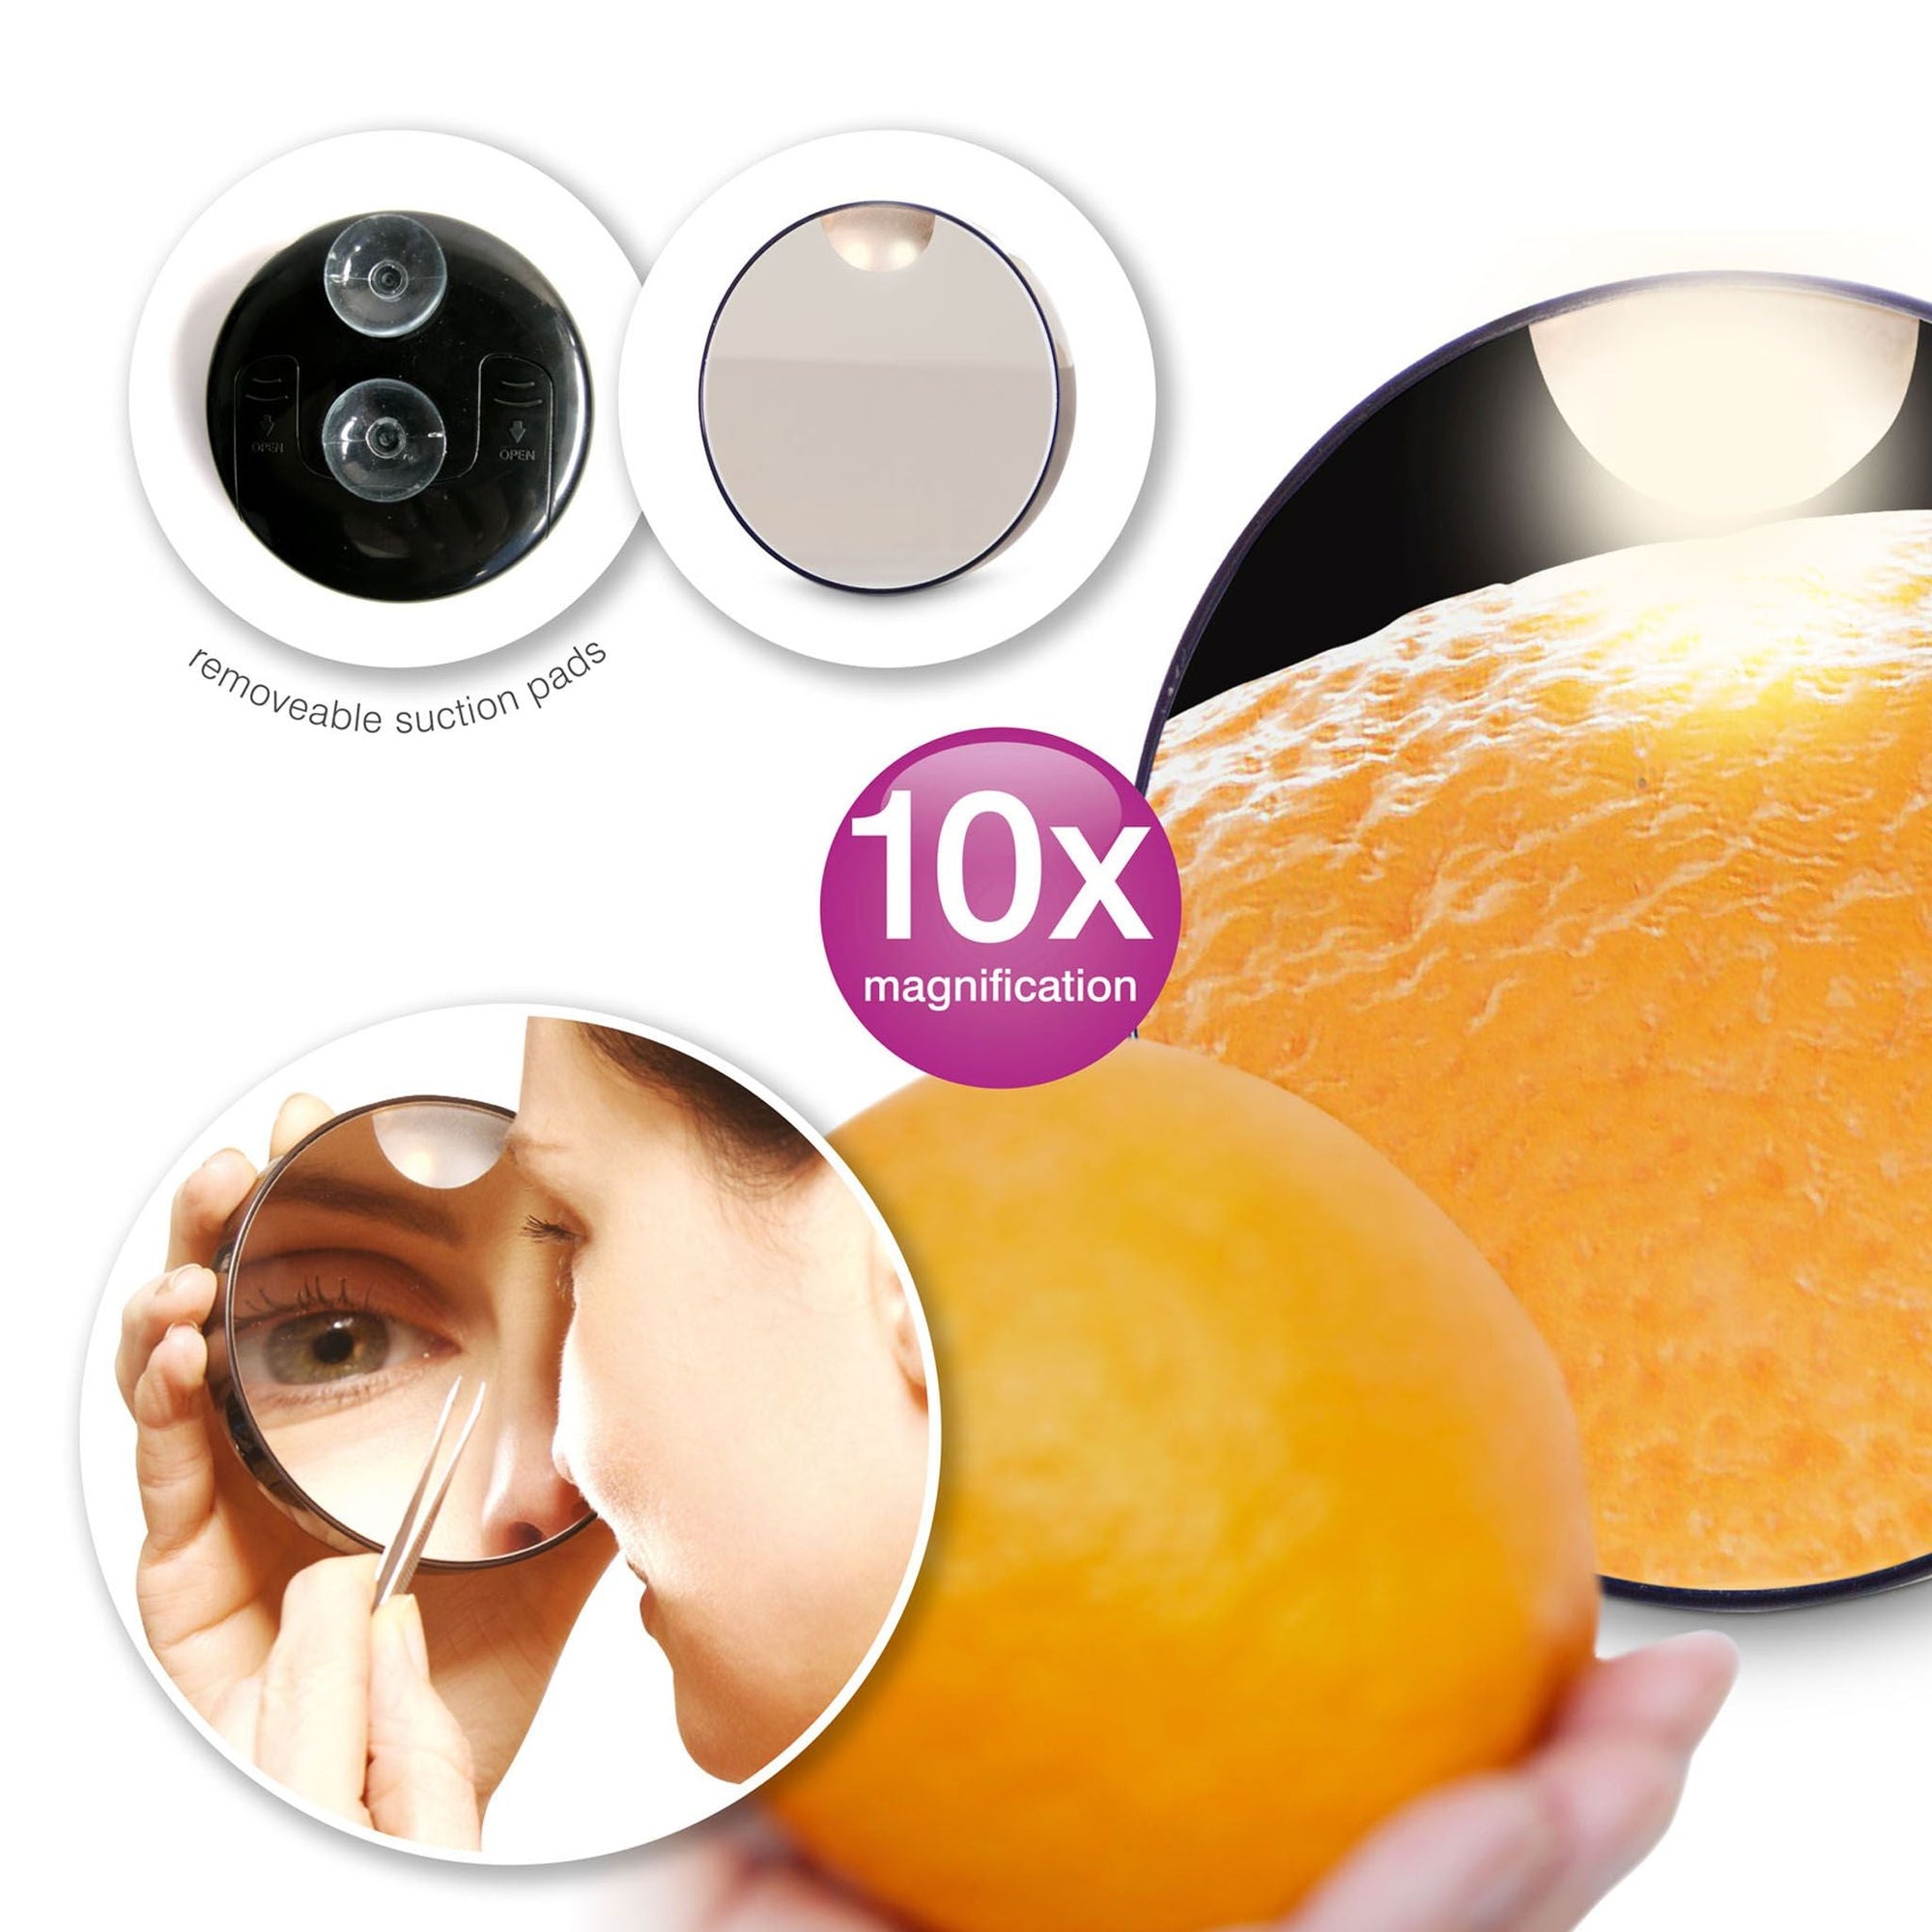 hotspot image of suction pads on the back of mirror a lady using mirror to tweeze her eyebrows and mirror reflecting 10x magnification on orange peel